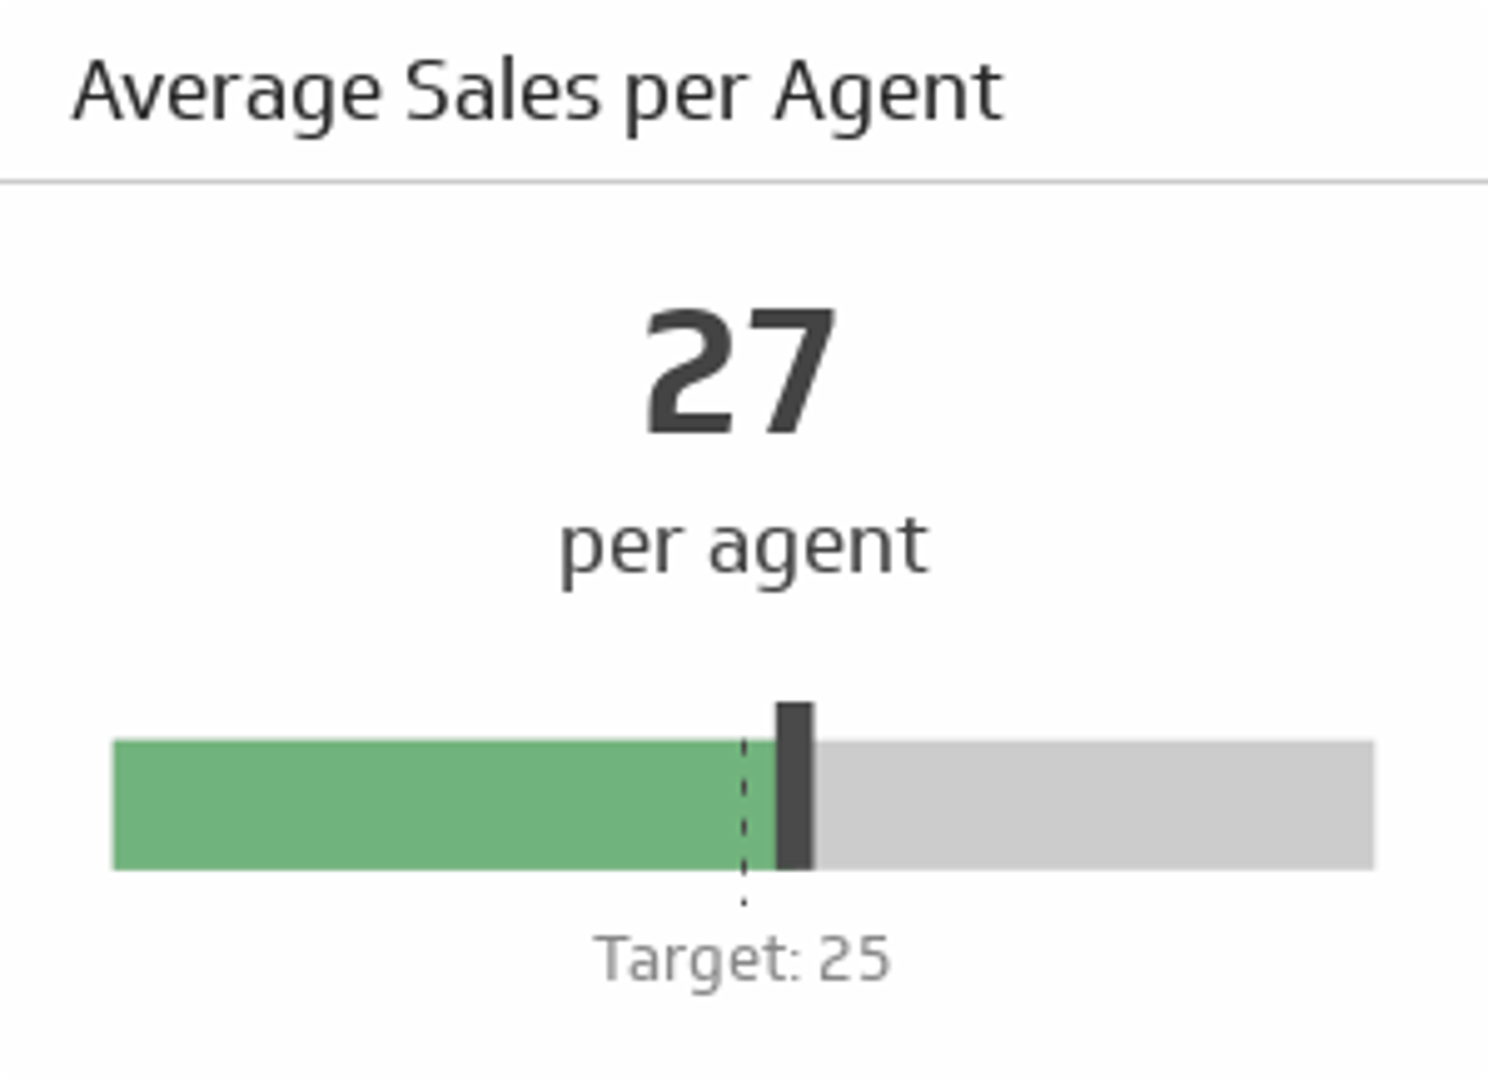 Related KPI Examples - Average Sales per Agent Metric